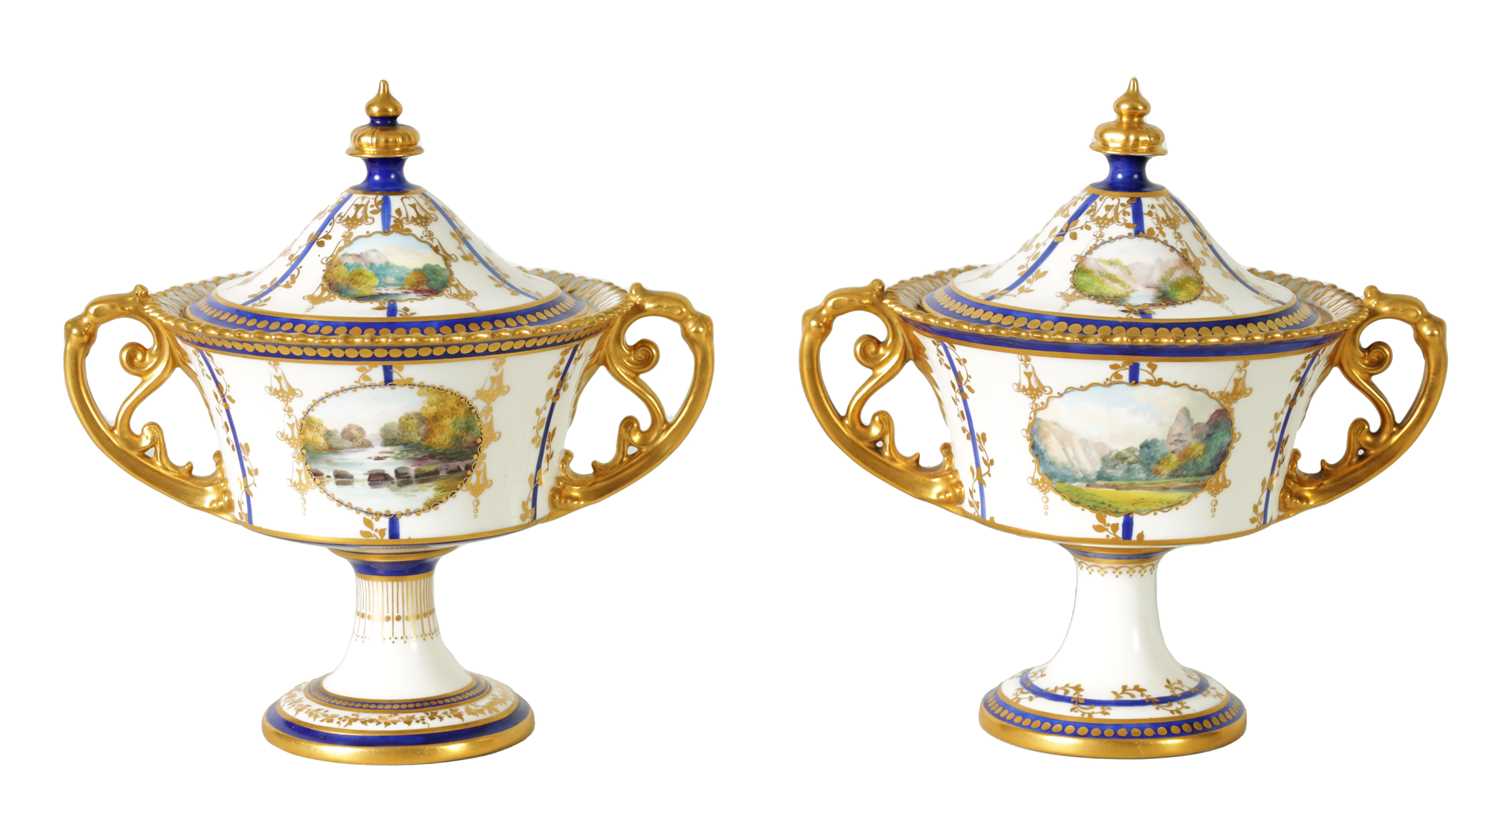 A FINE PAIR OF ROYAL CROWN DERBY CAMPANA SHAPED TWO-HANDLED PEDESTAL VASES AND COVERS - Image 7 of 22